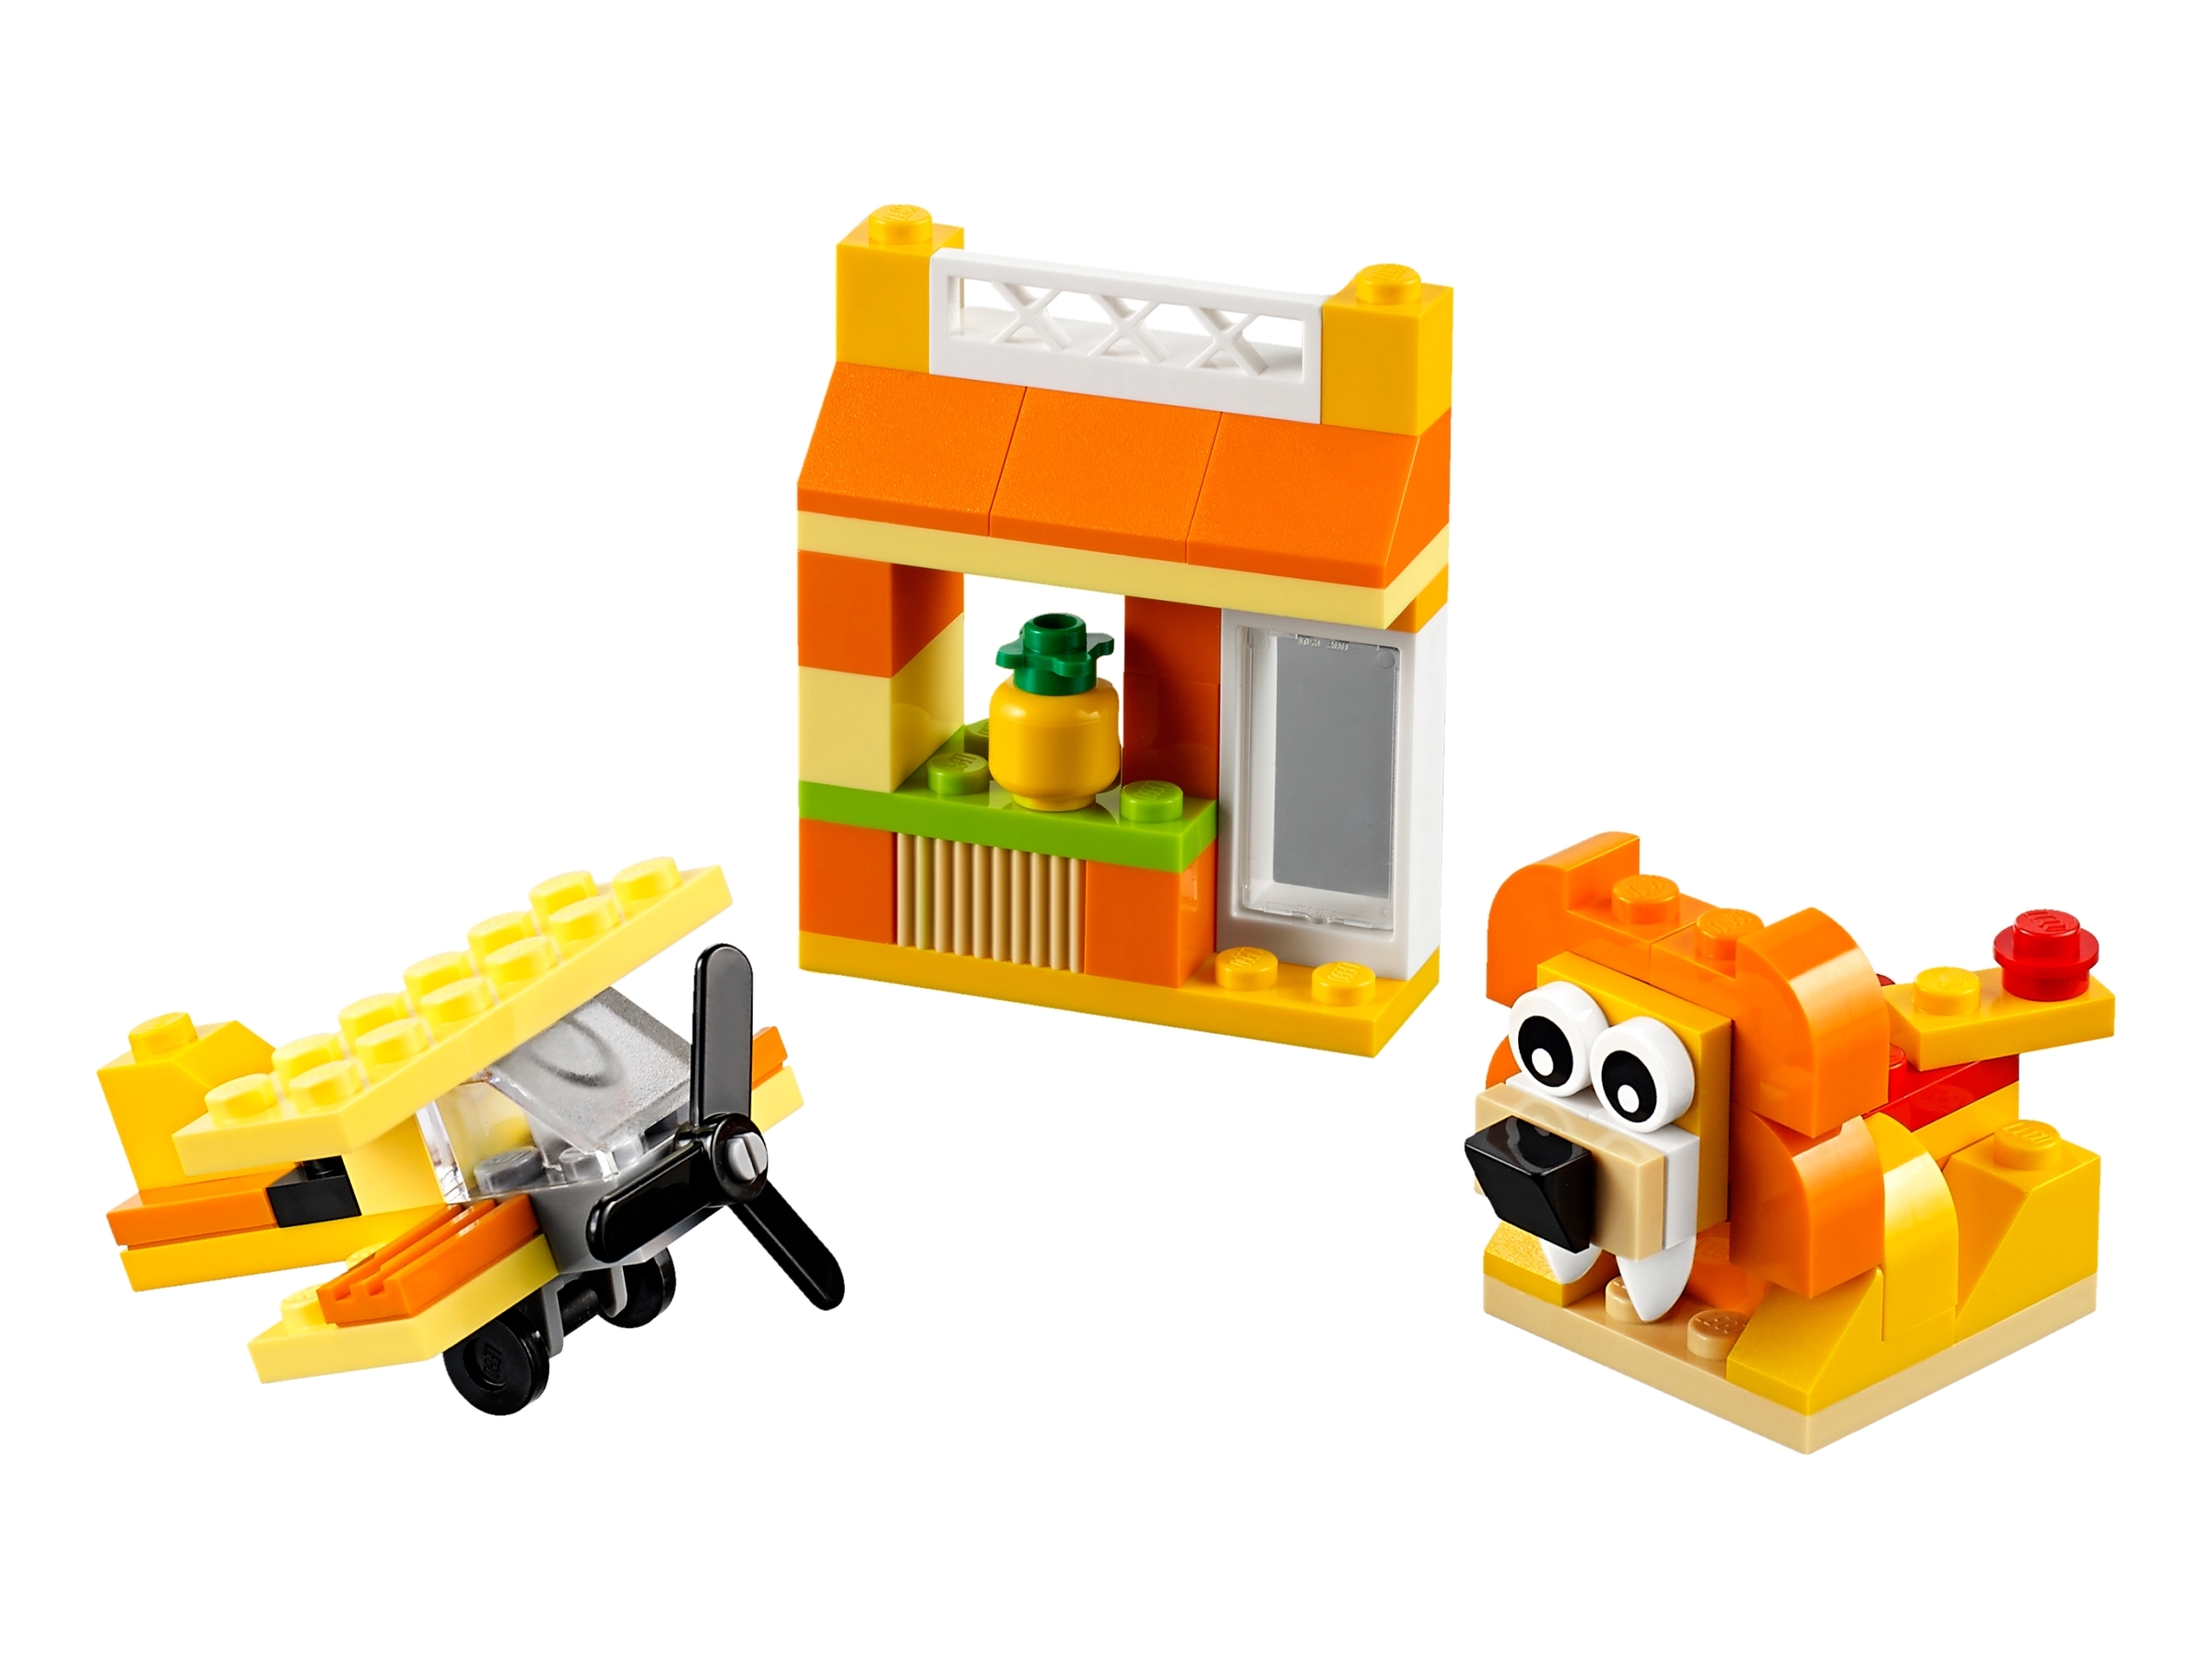 Orange Creativity Box 10709 | Classic | Buy online at the Official LEGO® Shop